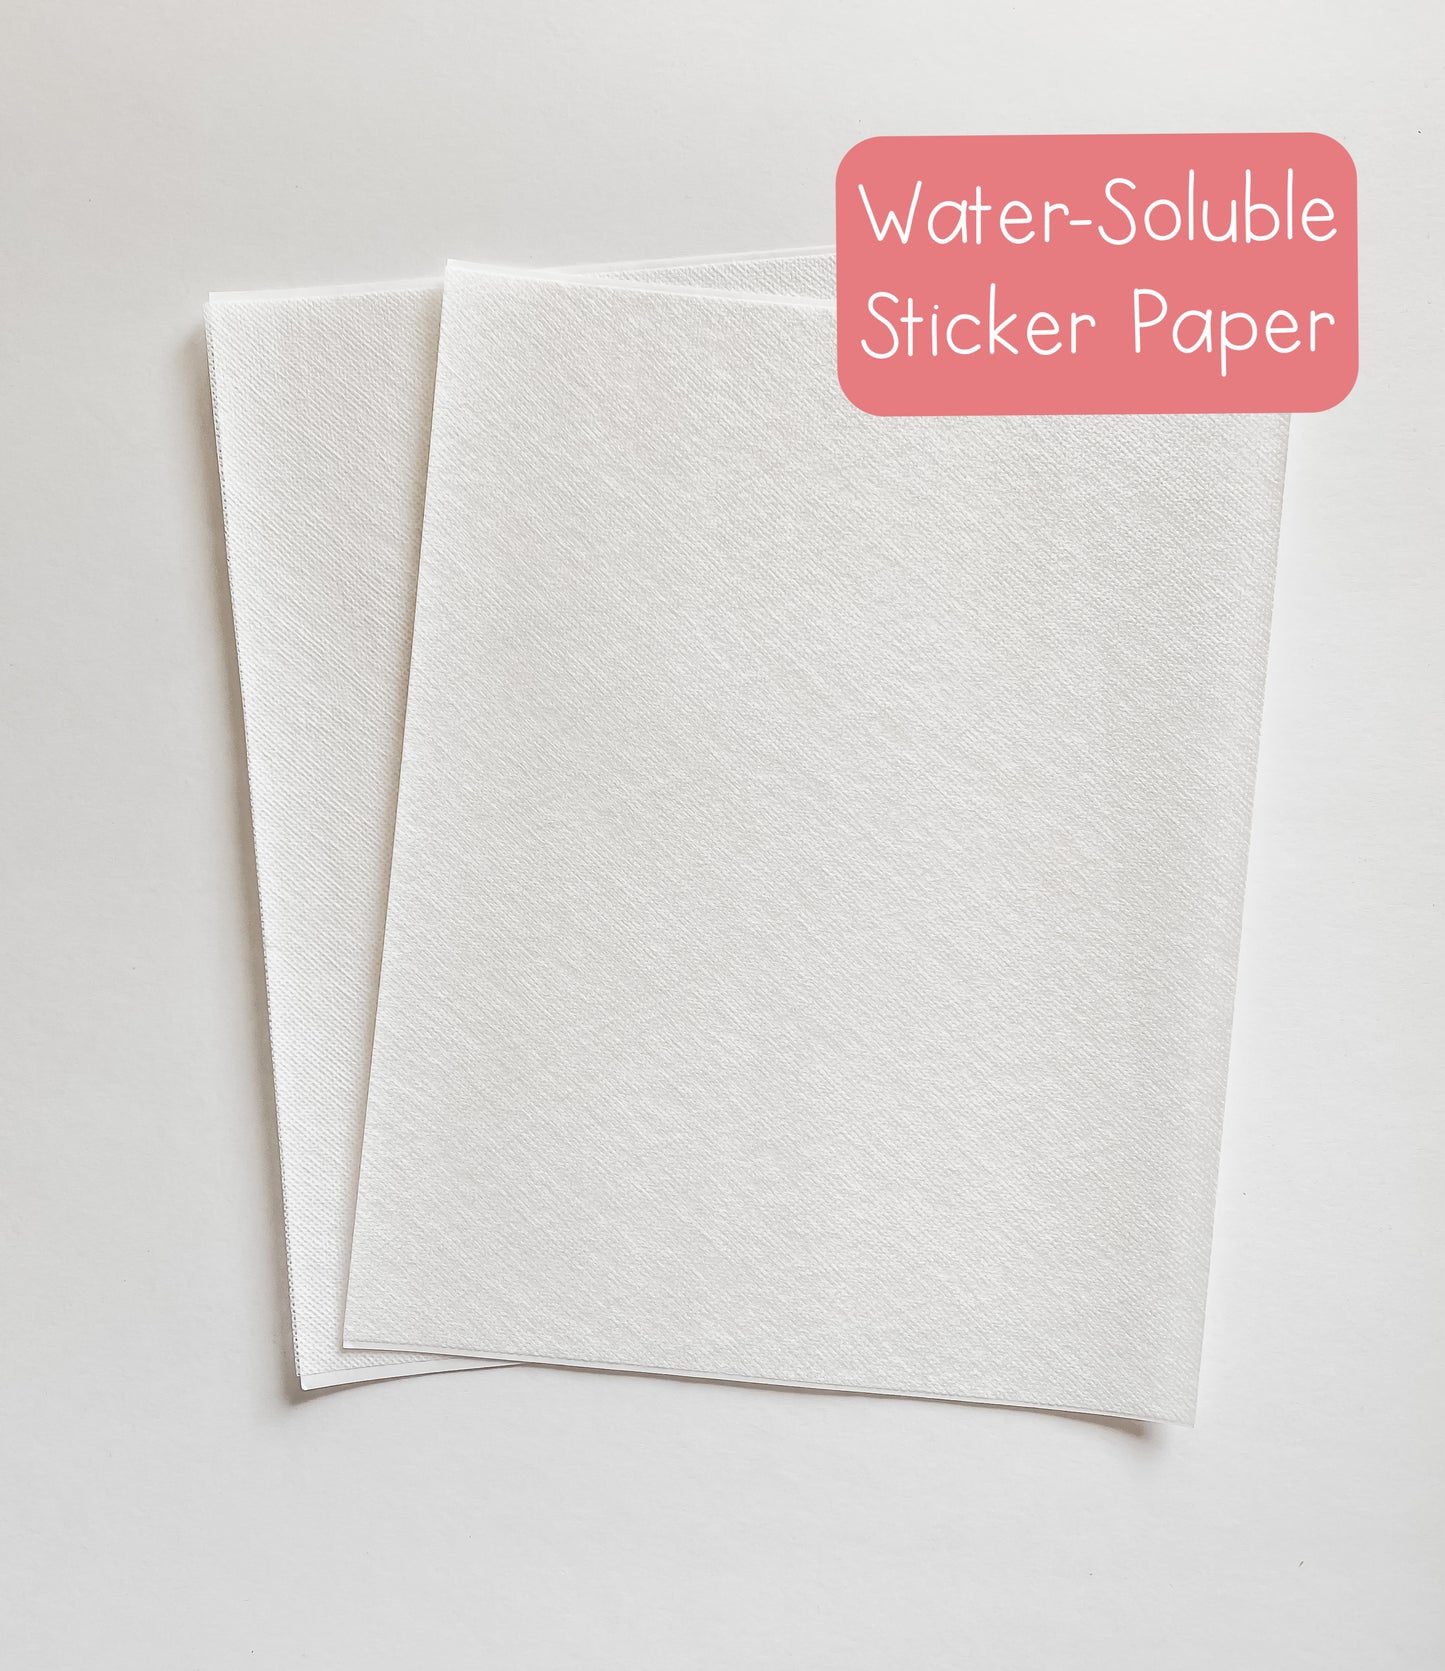 Water-Soluble Sticker Paper